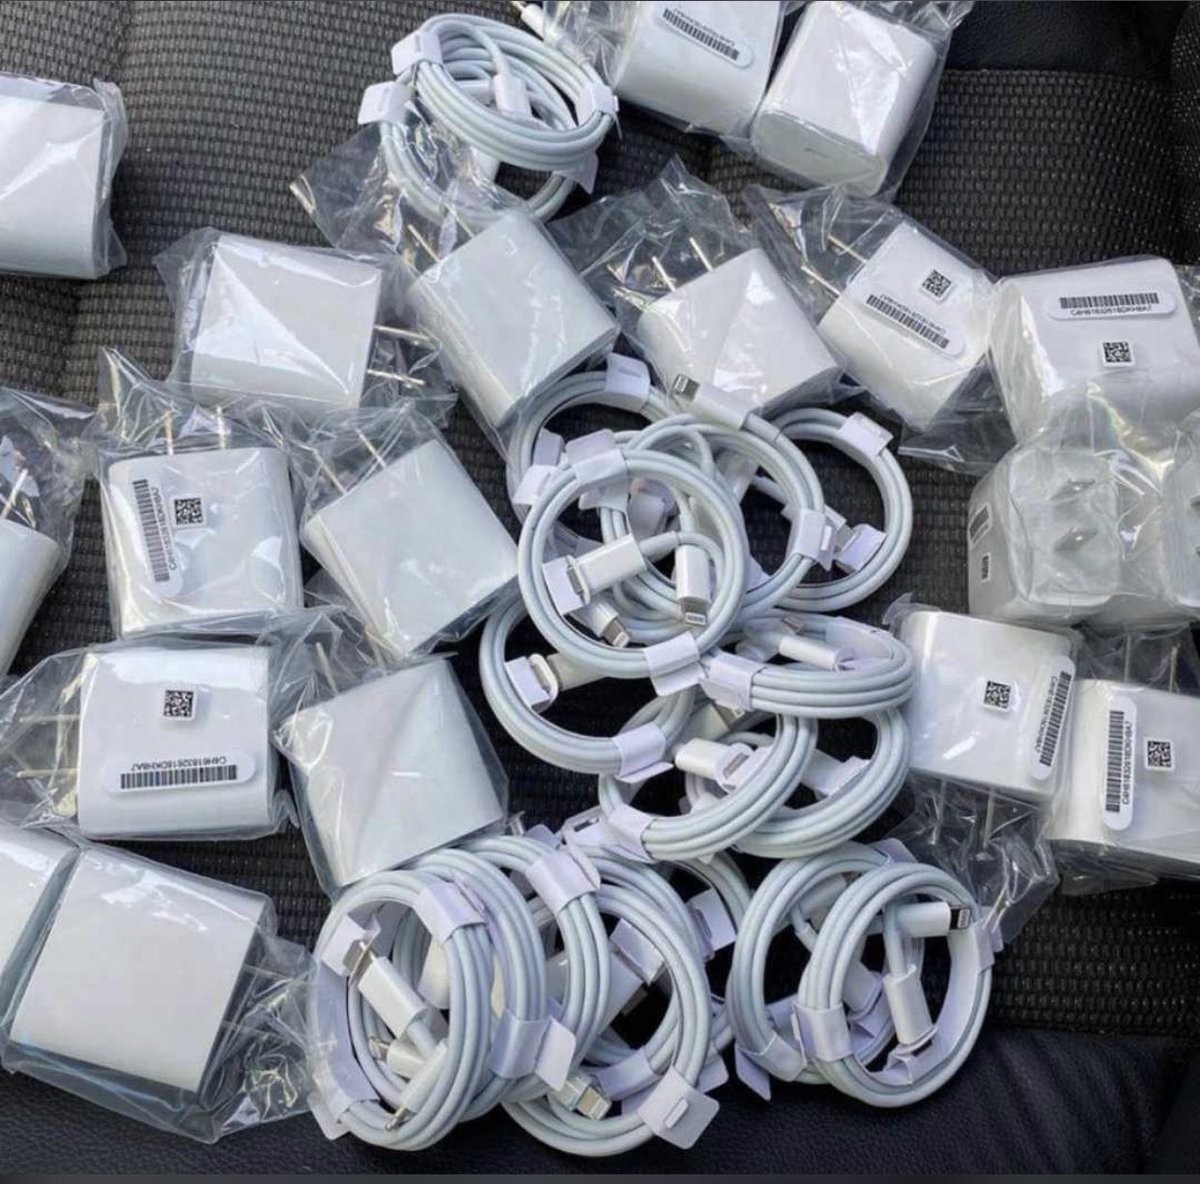 Please buy your iPhones,Laptops, AirPods, Apple Watches and Fast chargers from me😊
Swapping is allowed👍
You can call Or WhatsApp: 0241636577
#TechShack 

#ShattaTuesdayMarket 
Please retweet my hustle 🙏